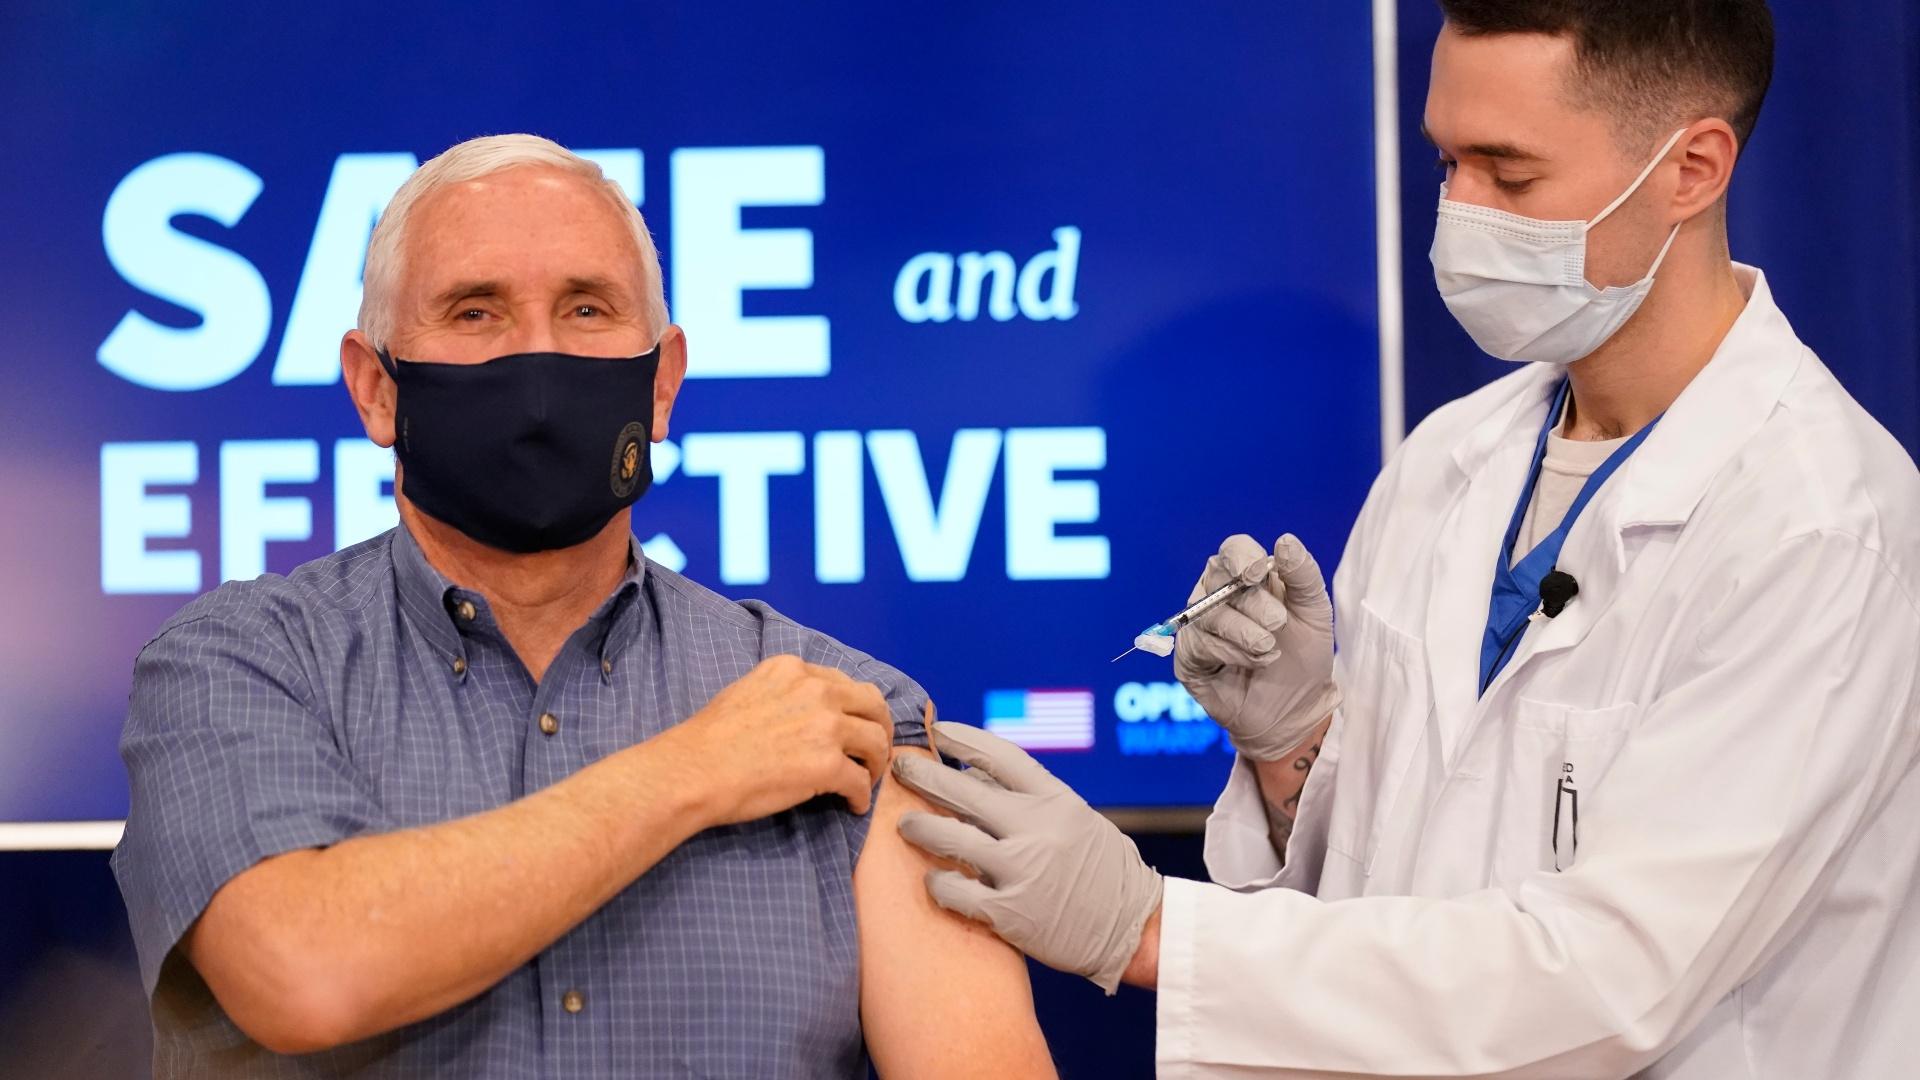 Vice President Mike Pence receives a Pfizer-BioNTech COVID-19 vaccine shot at the Eisenhower Executive Office Building on the White House complex, Friday, Dec. 18, 2020, in Washington. Karen Pence, and U.S. Surgeon General Jerome Adams also participated. (AP Photo / Andrew Harnik)